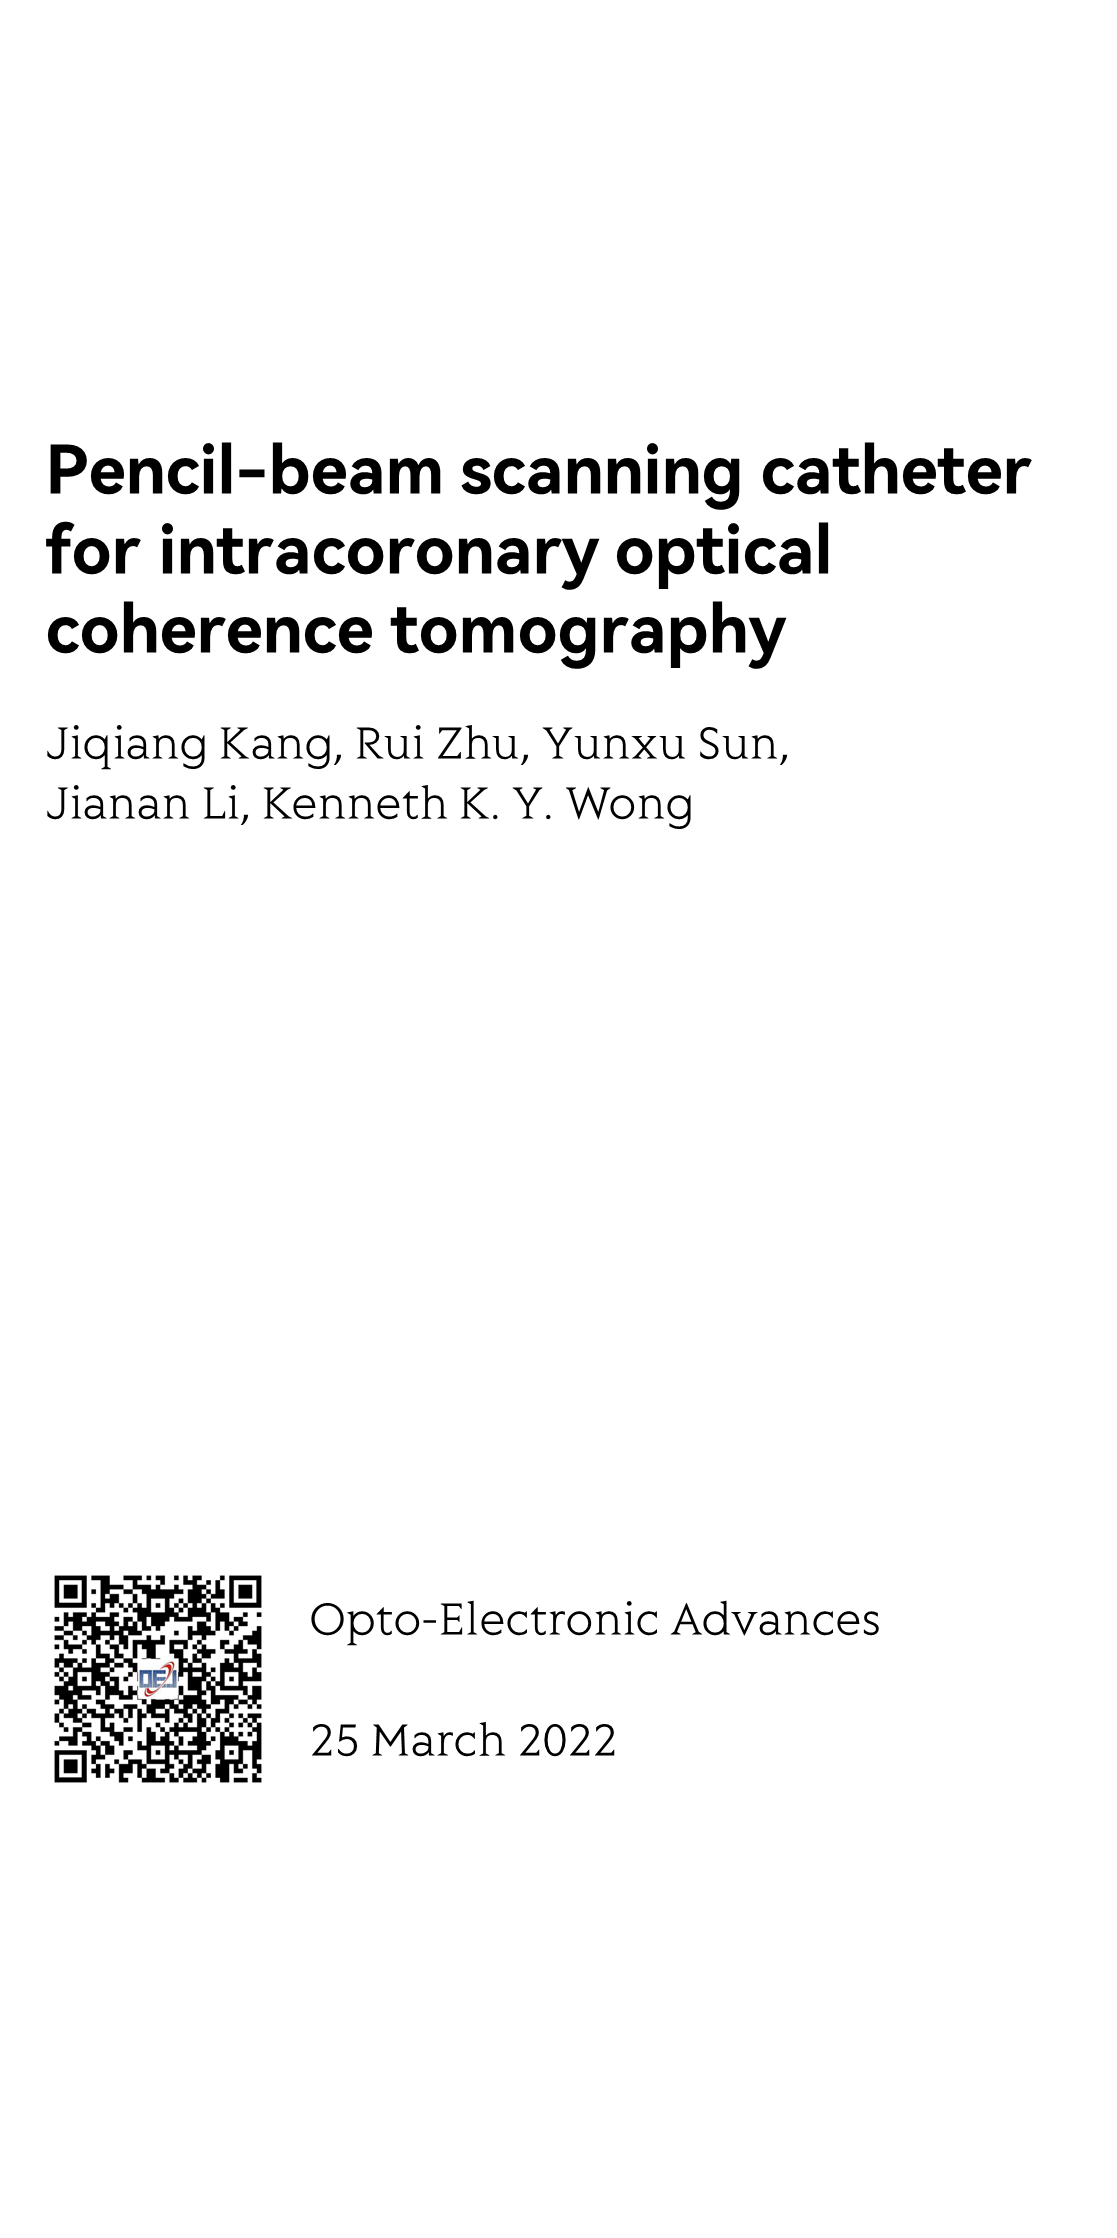 Pencil-beam scanning catheter for intracoronary optical coherence tomography_1